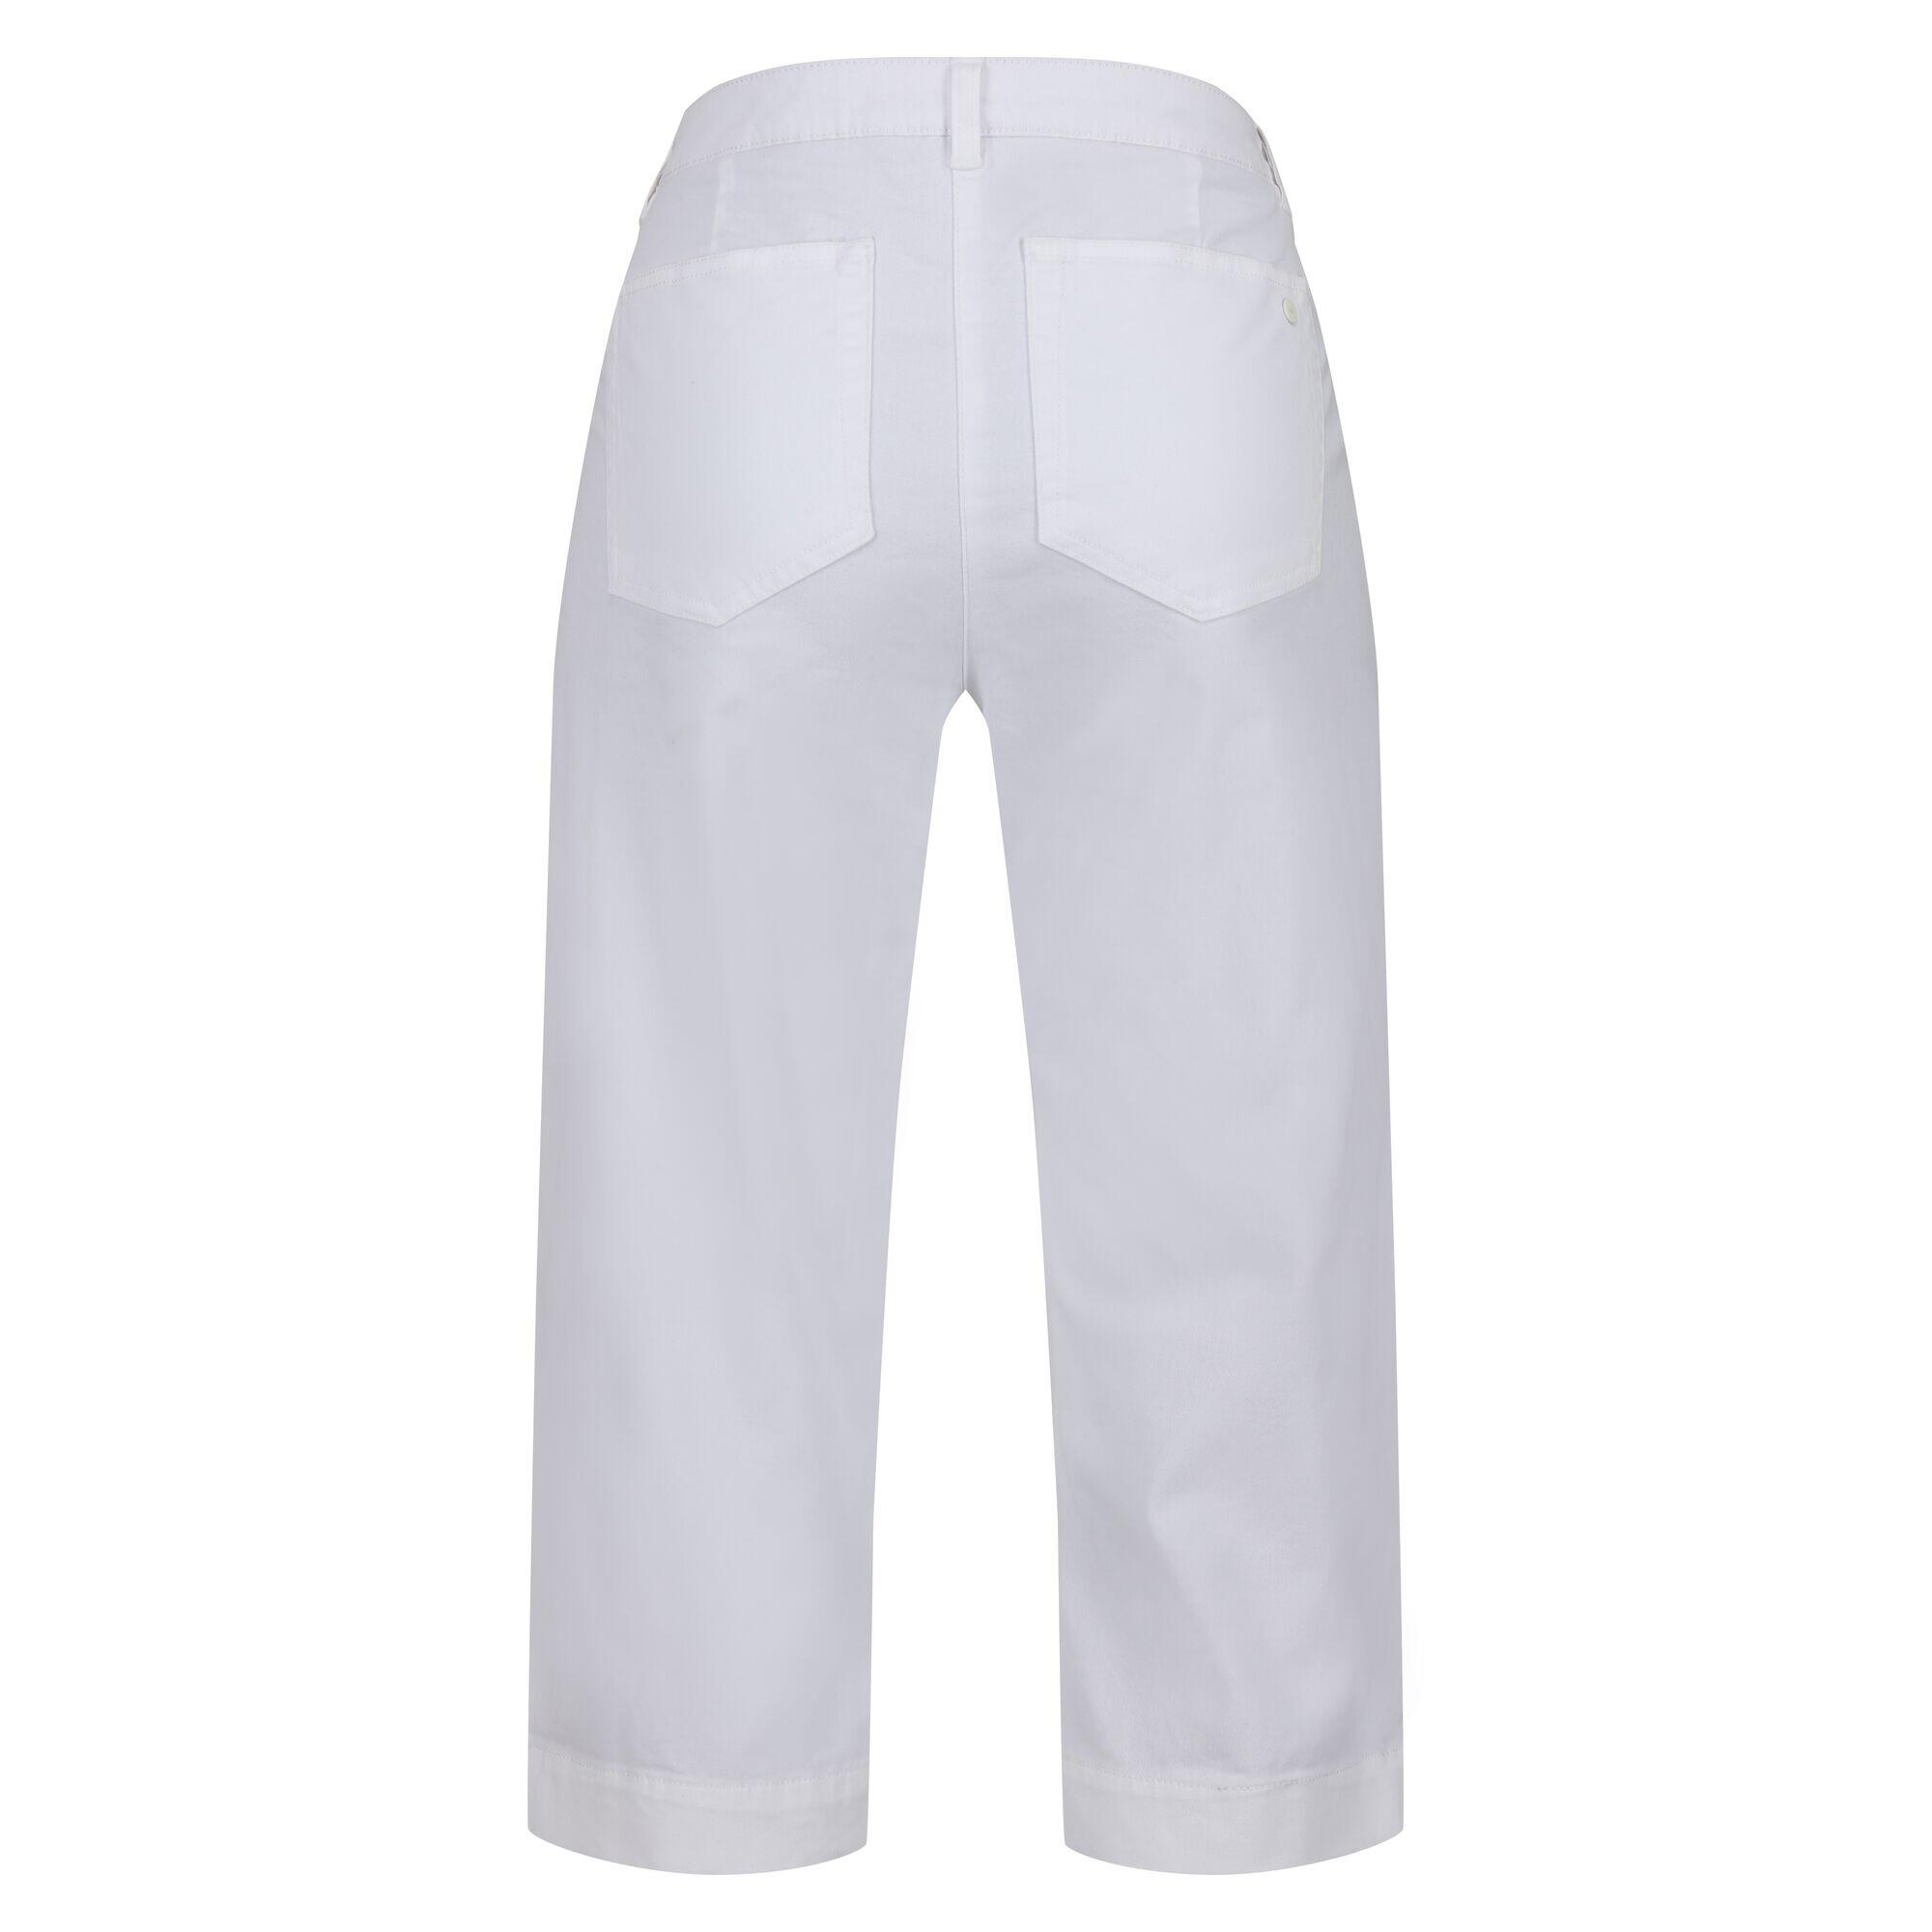 Womens/Ladies Bayla Cropped Trousers (White) 2/5